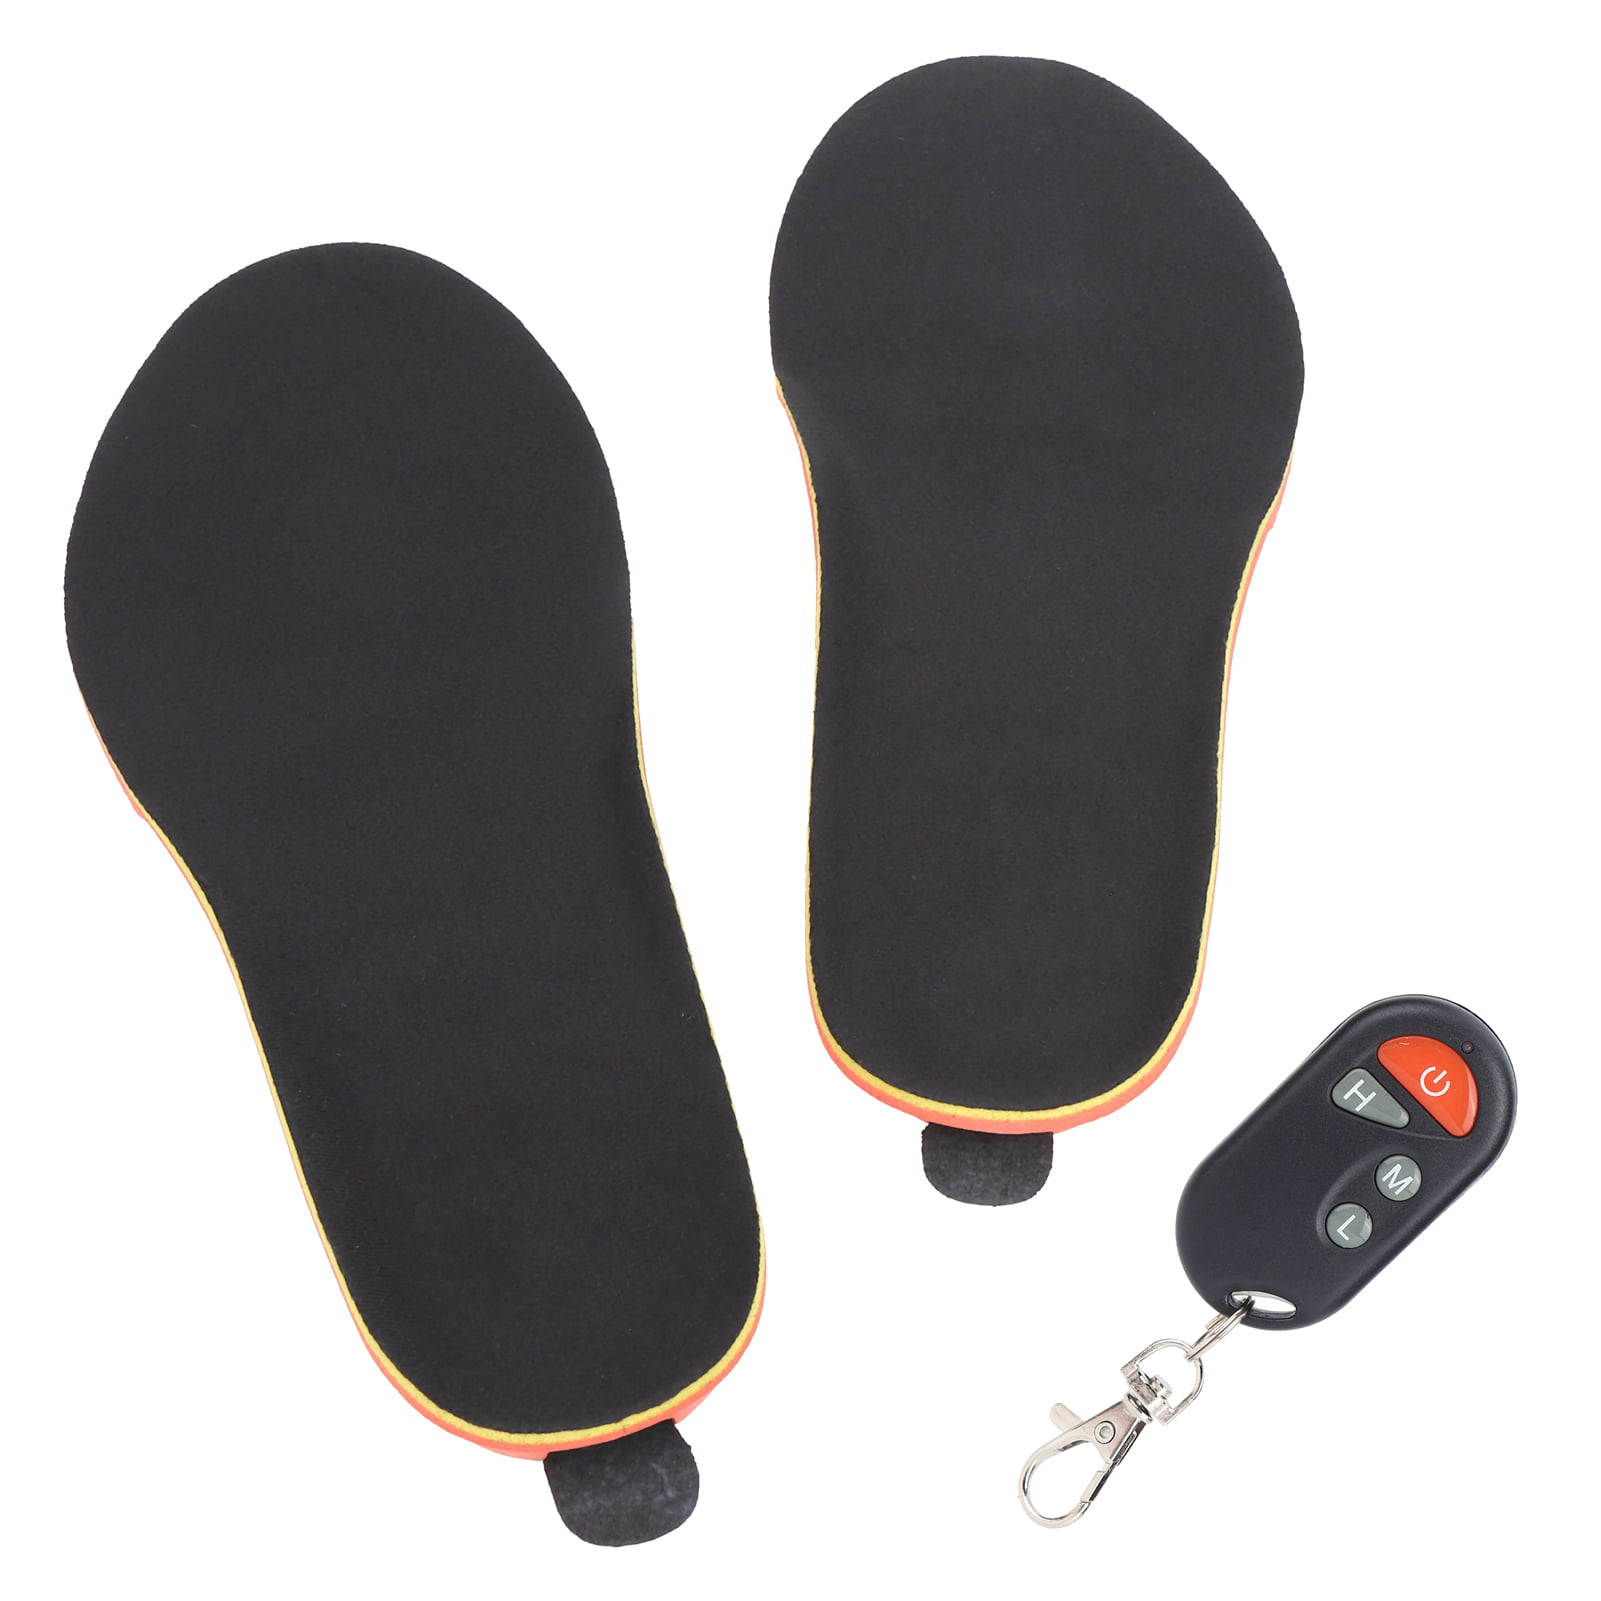 Details about   Electric Heated Warmer Insoles Foot 3-Heat Levels w/Remote Control Outdoor Work 